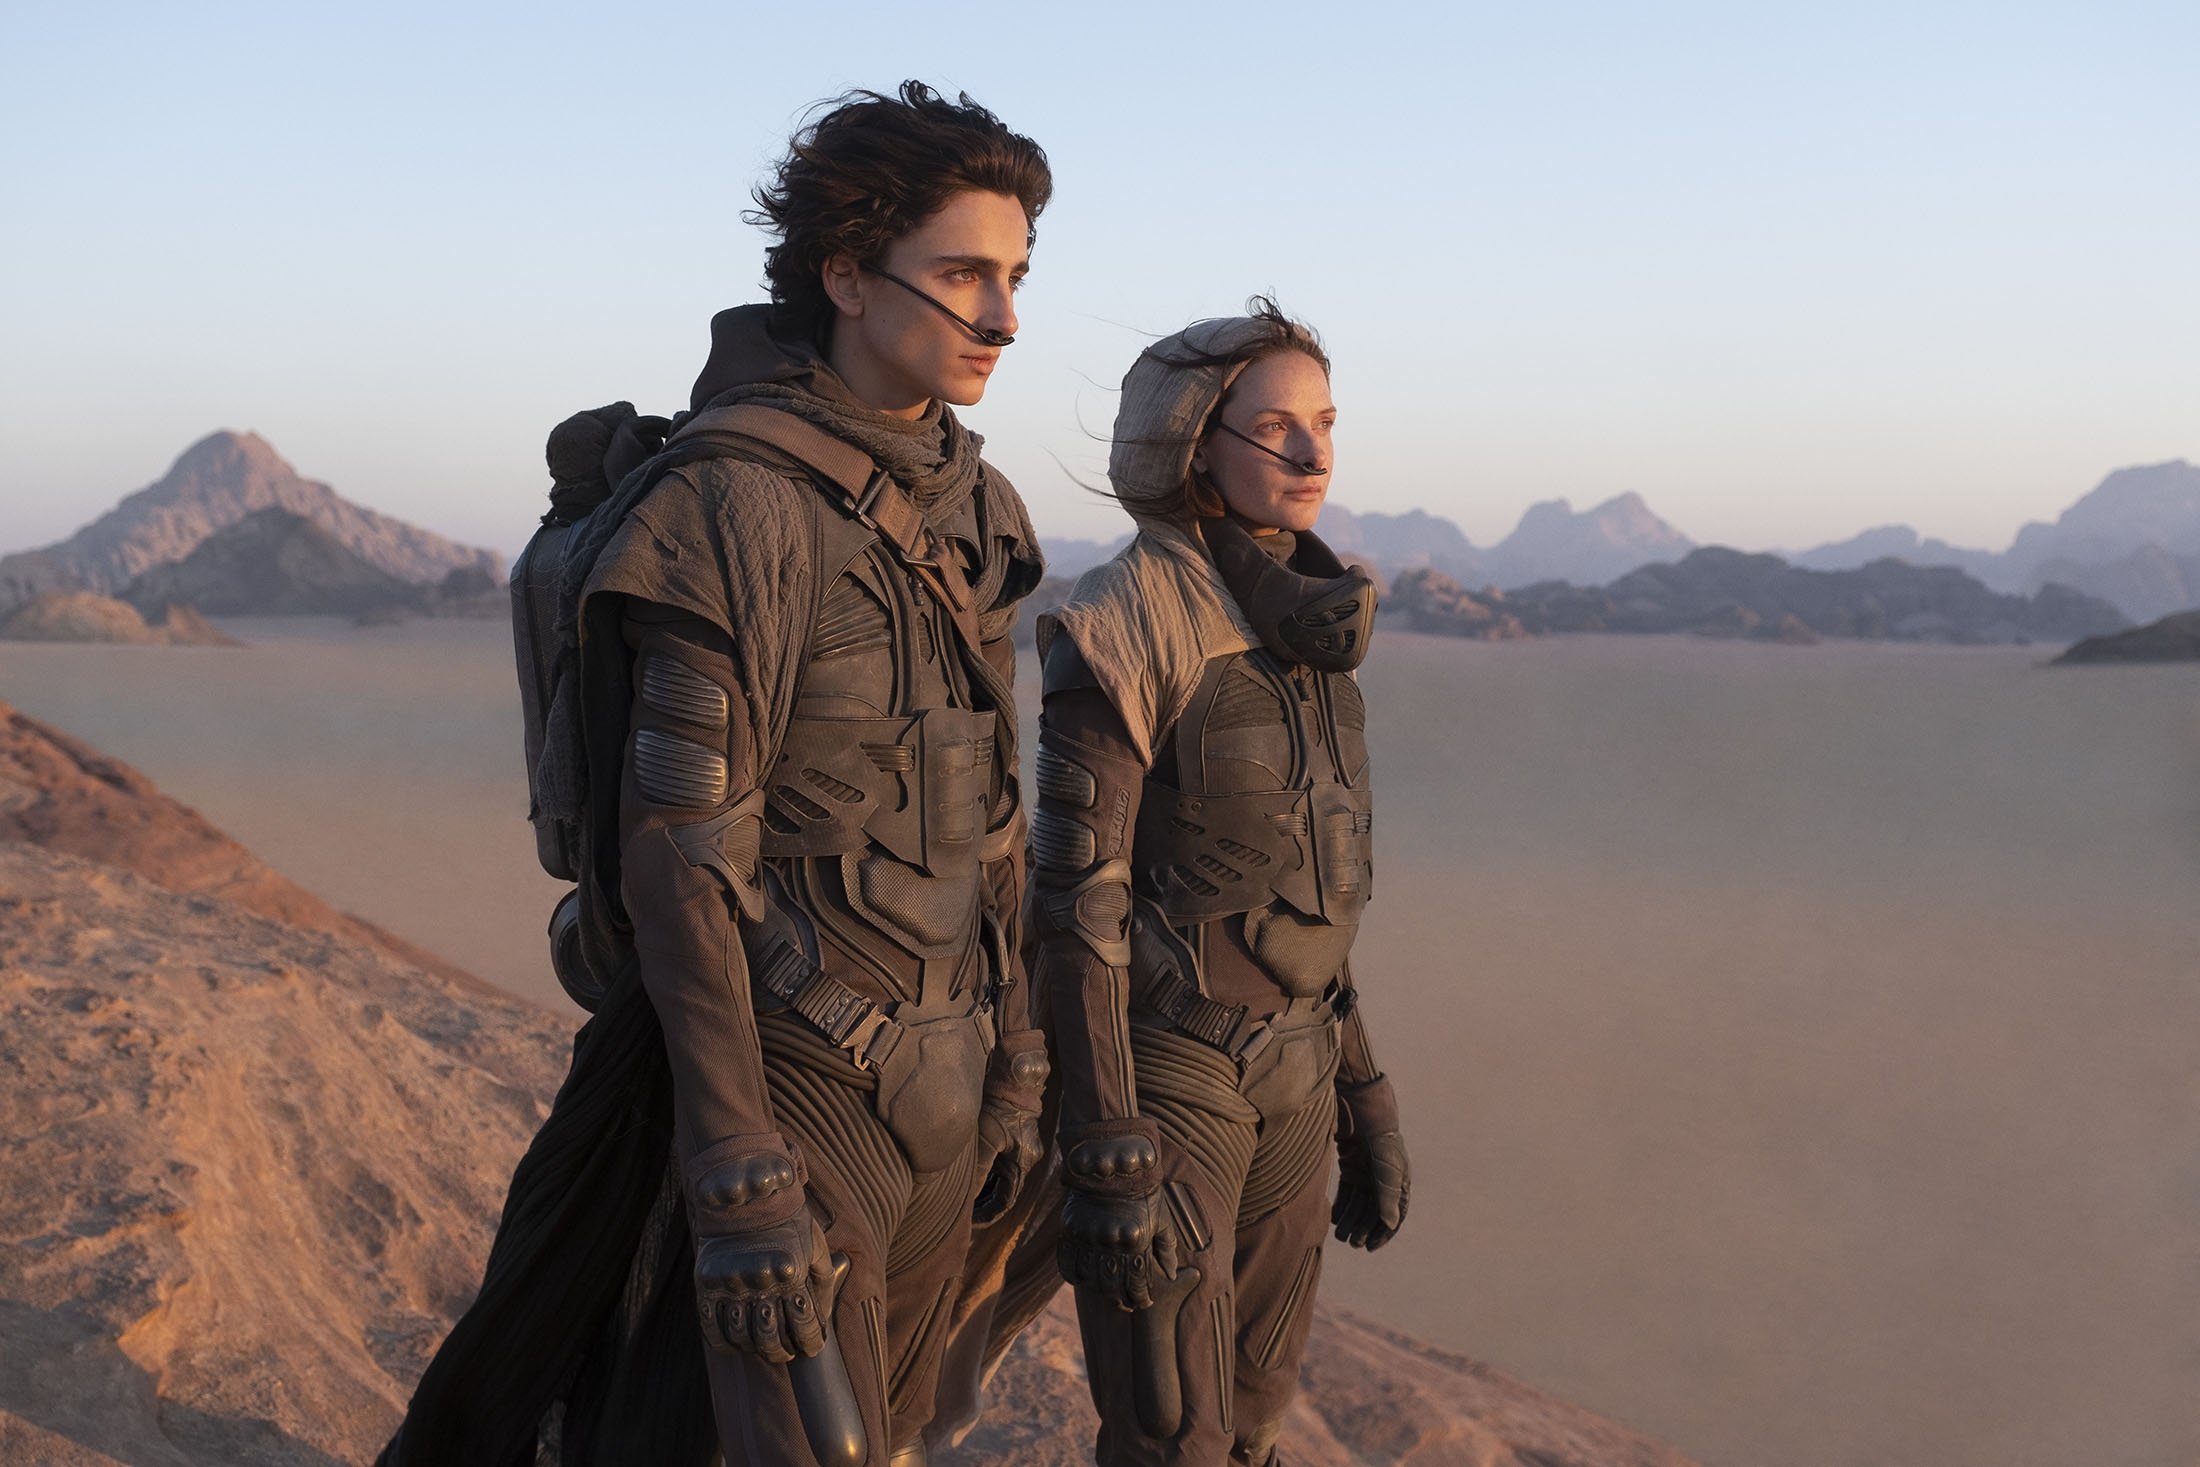 Timothee Chalamet (L), and Rebecca Ferguson, in a scene from the upcoming 2021 film "Dune." (Warner Bros. via AP)